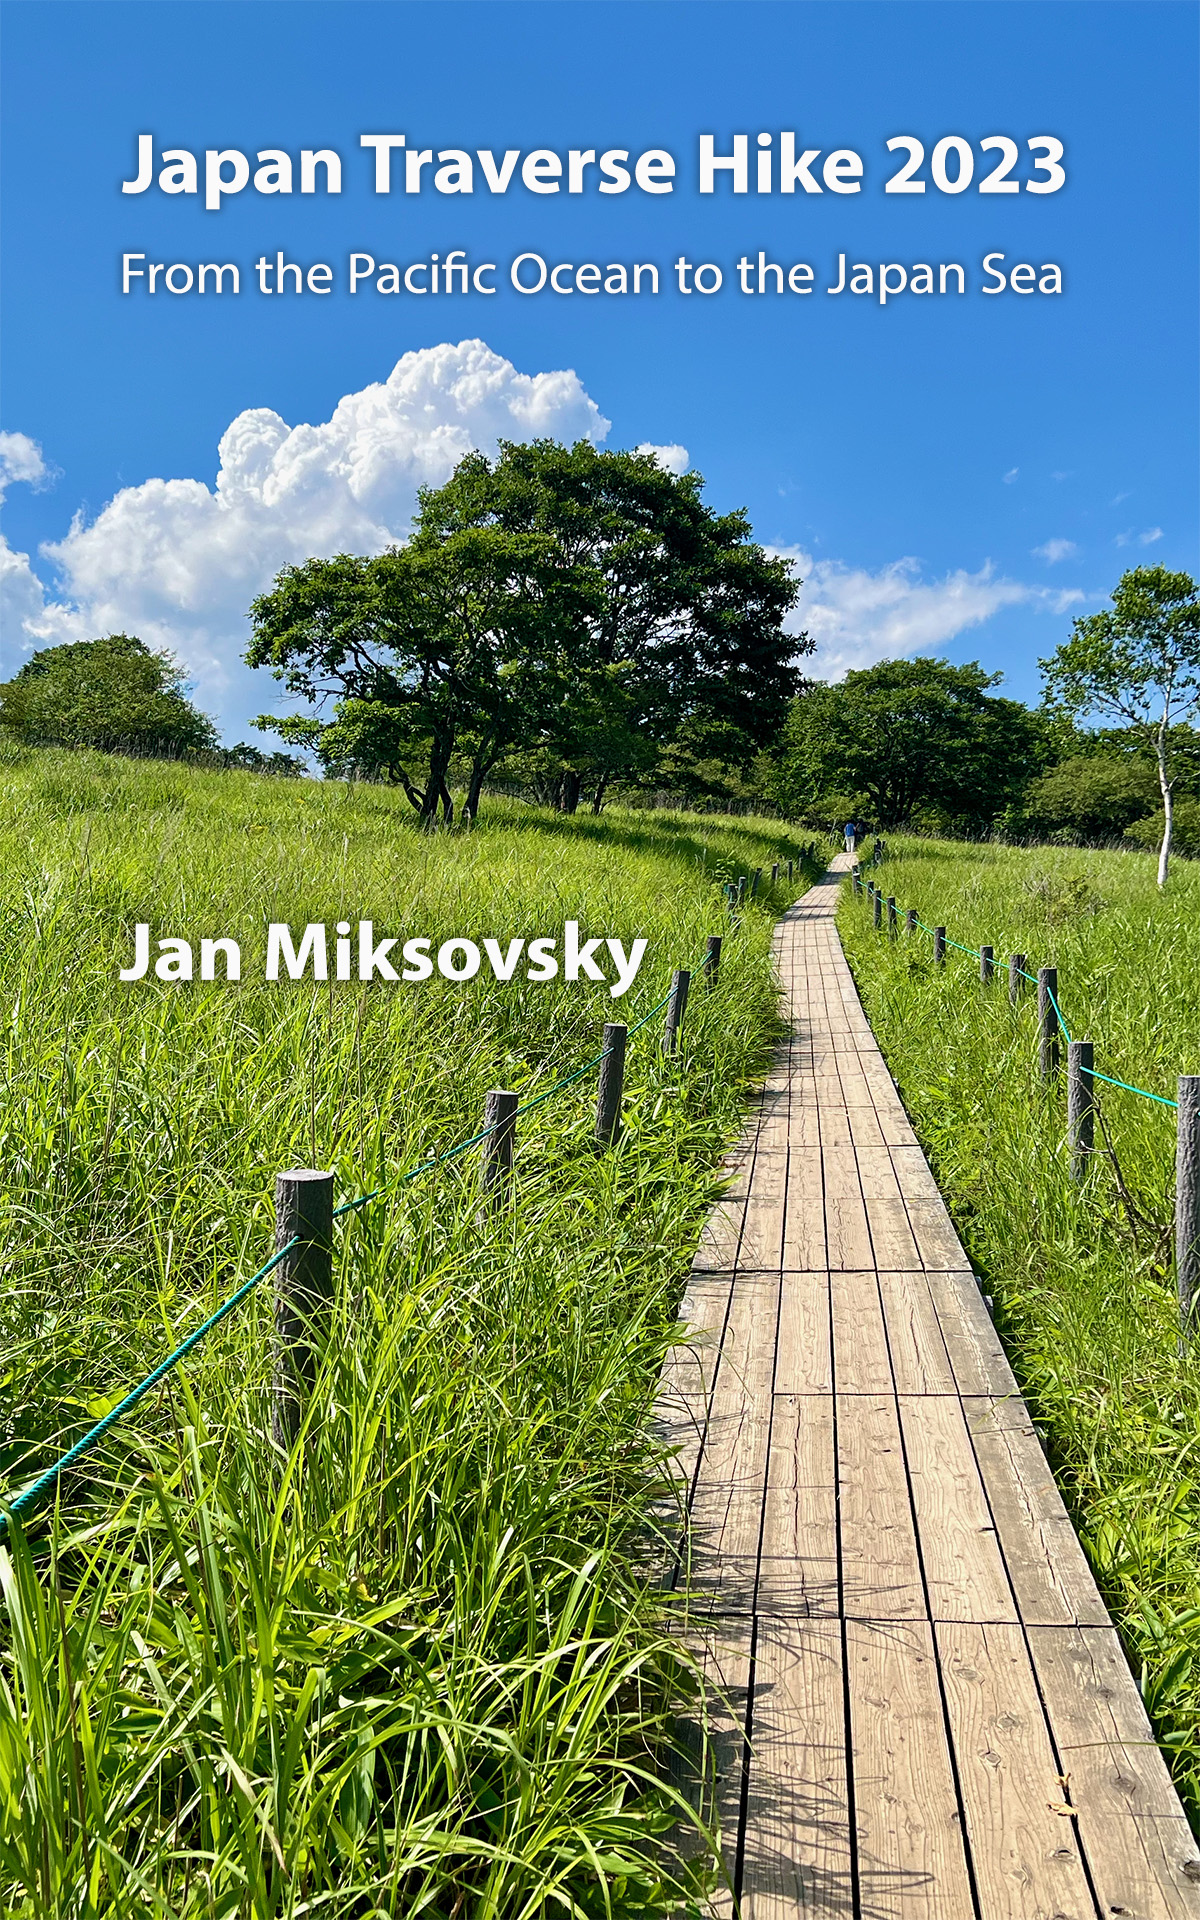 Book cover showing a grassy meadow and an elevated walking path